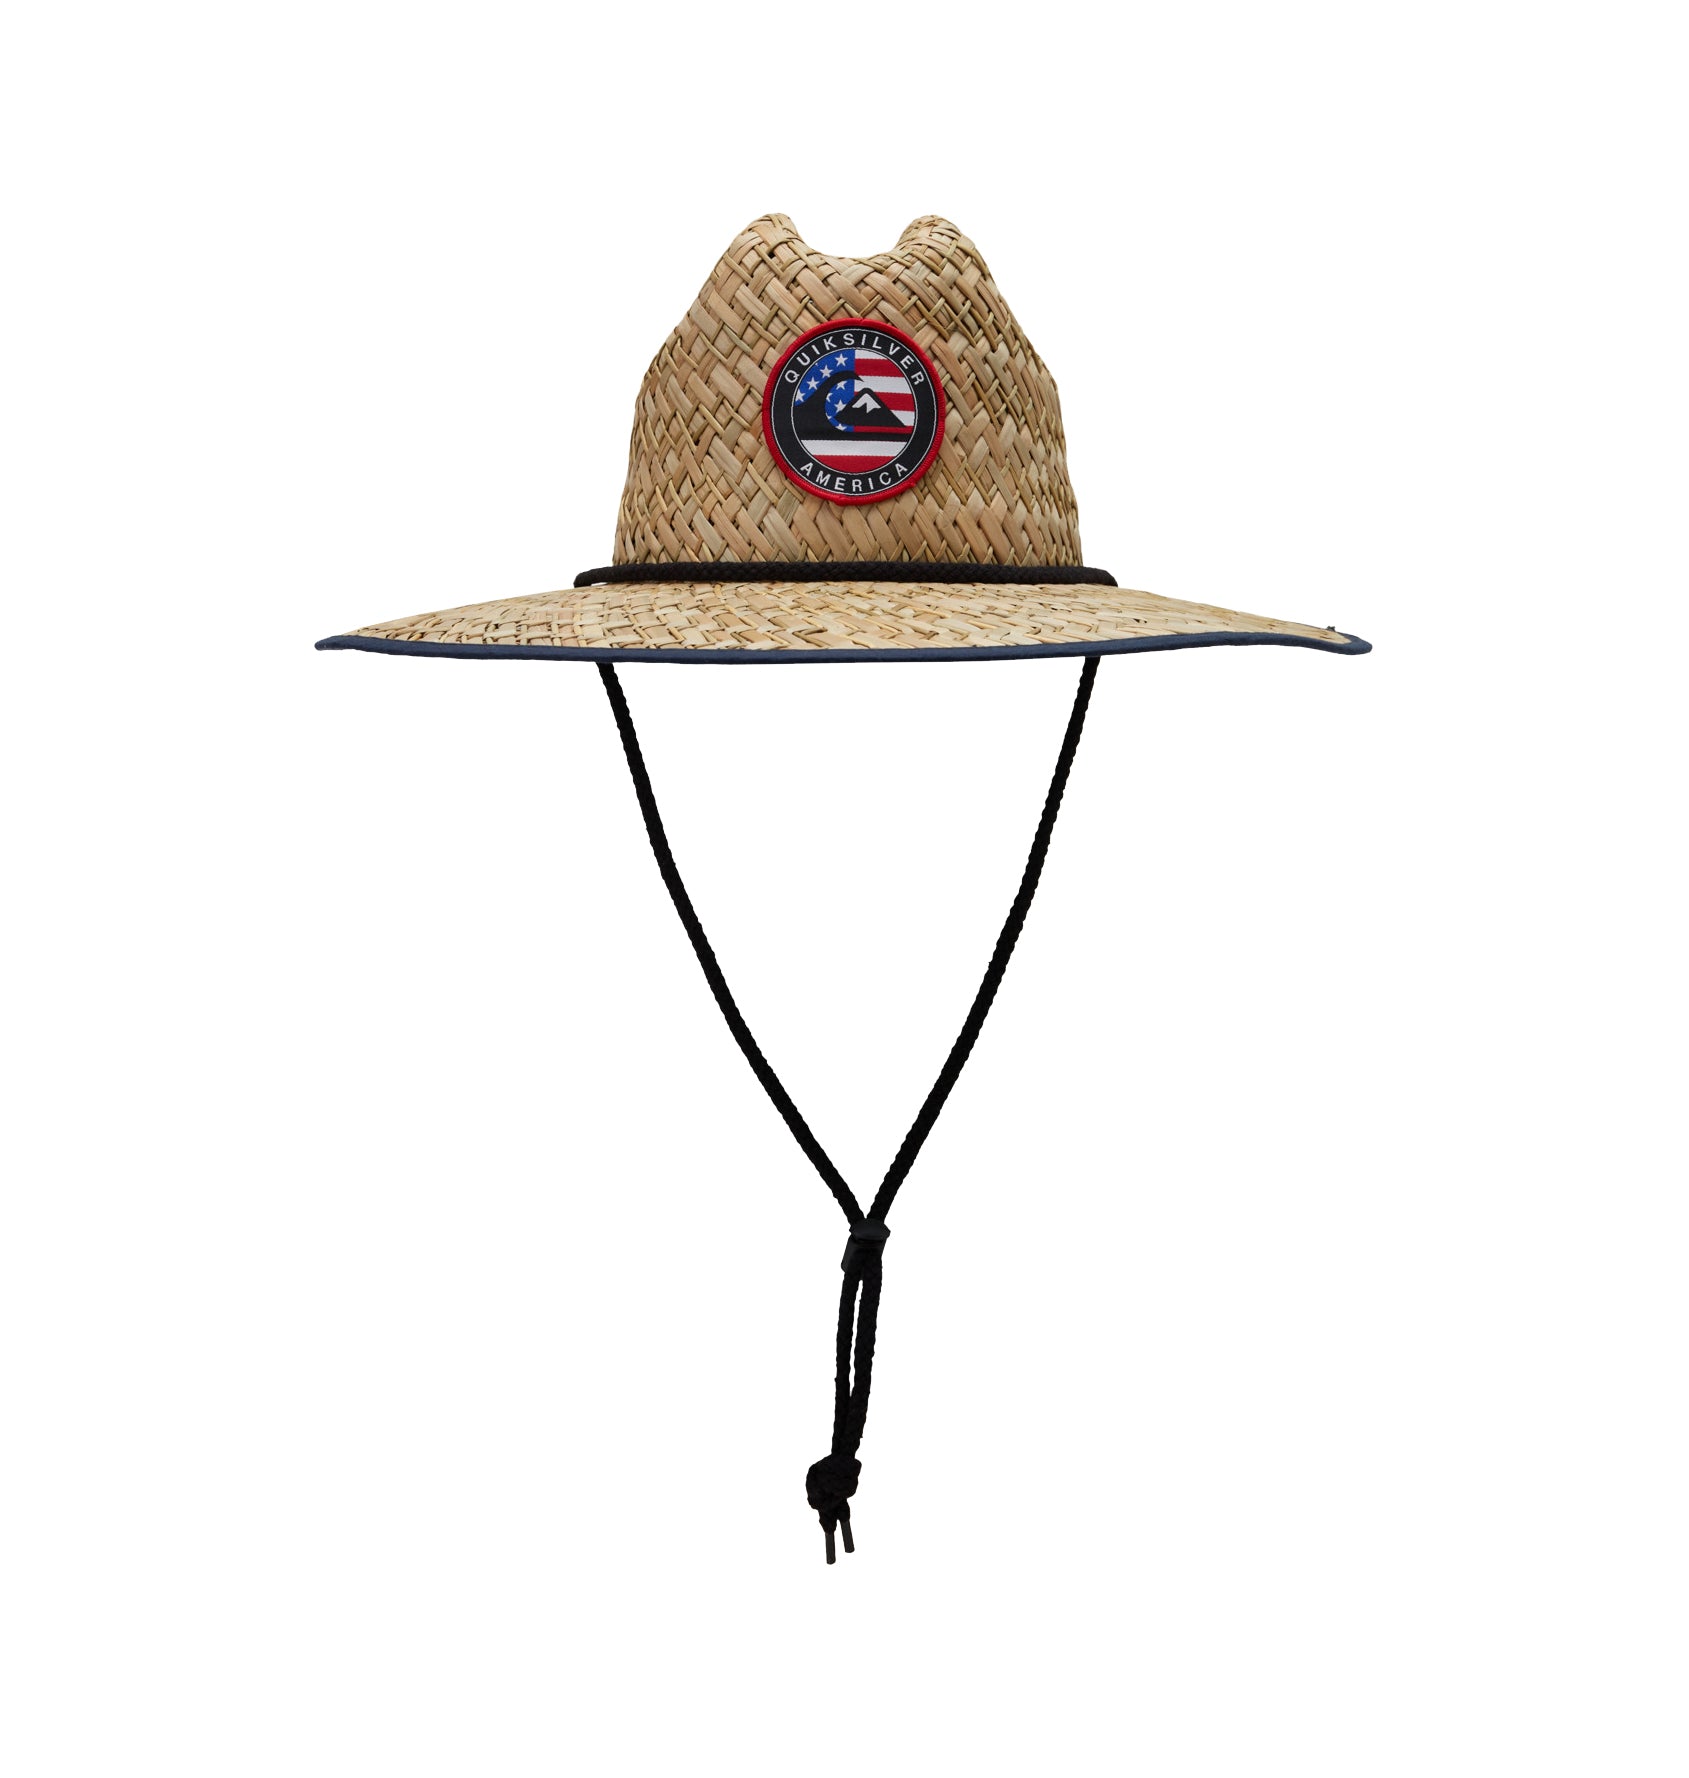 Quiksilver Outsider Americana Straw Lifeguard Hat XBBR S/M